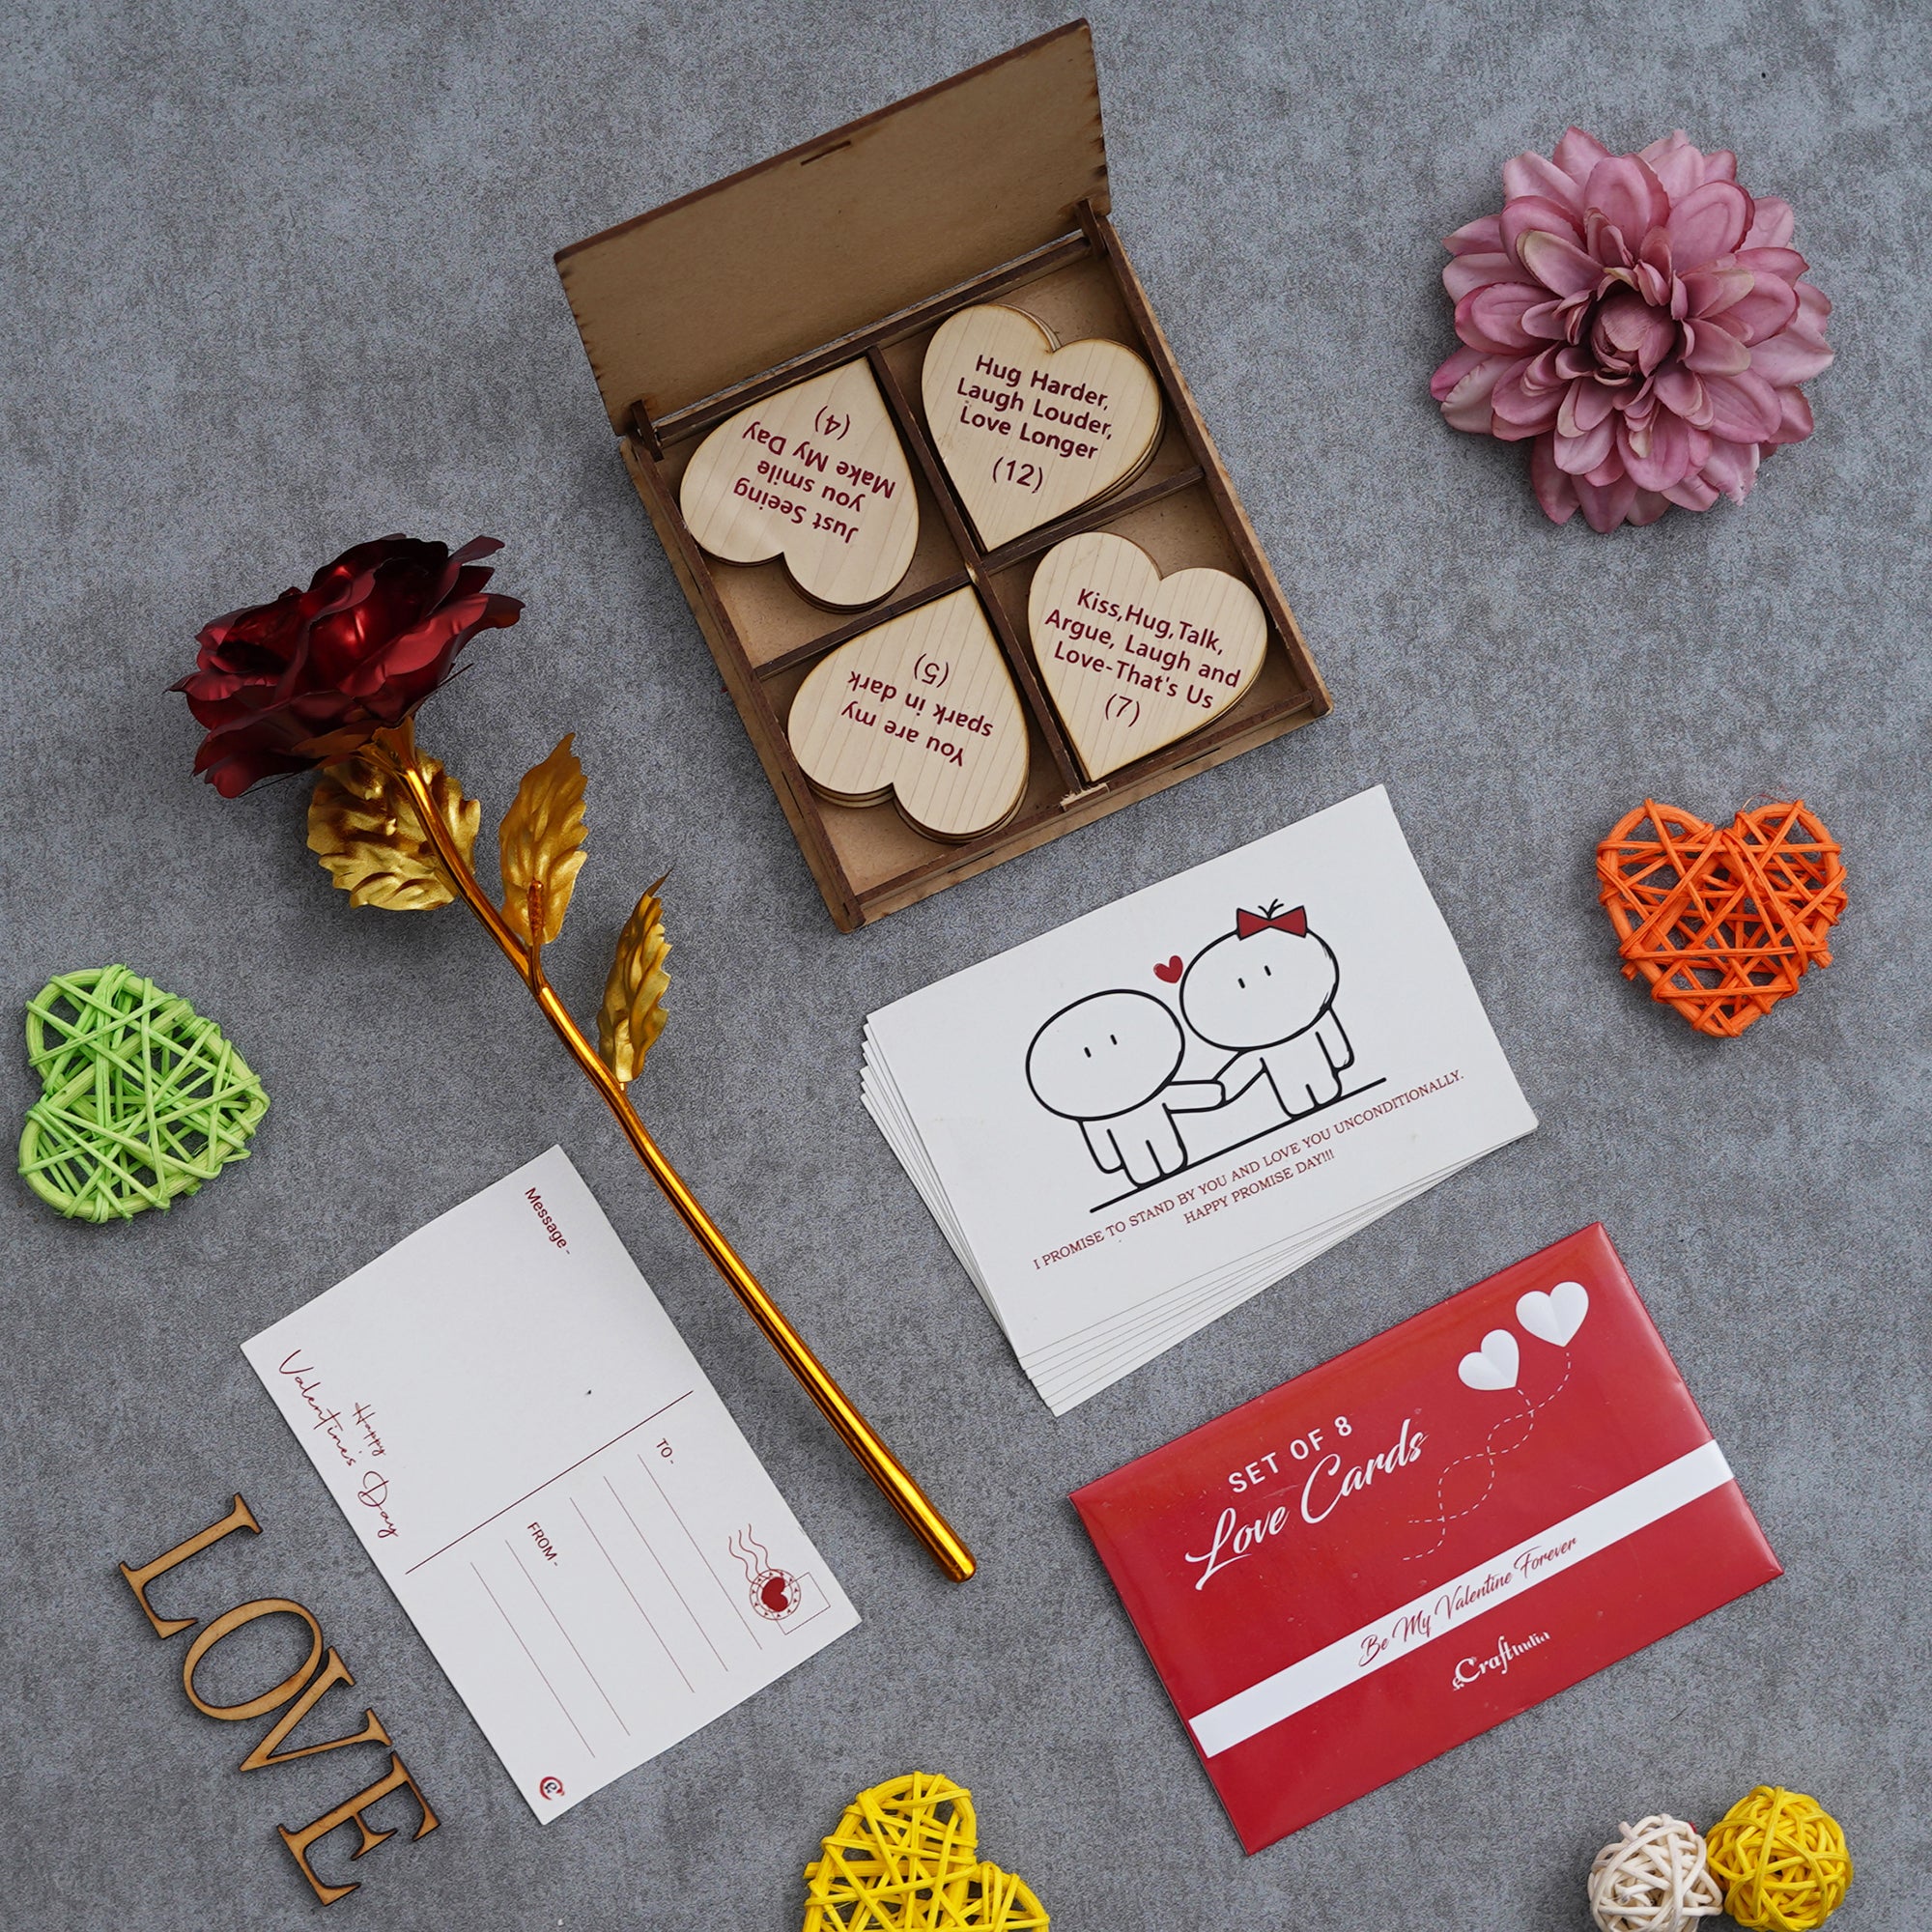 Valentine Combo of Set of 8 Love Post Cards Gift Cards Set, Golden Red Rose Gift Set, "20 Reasons Why I Love You" Printed on Little Hearts Wooden Gift Set